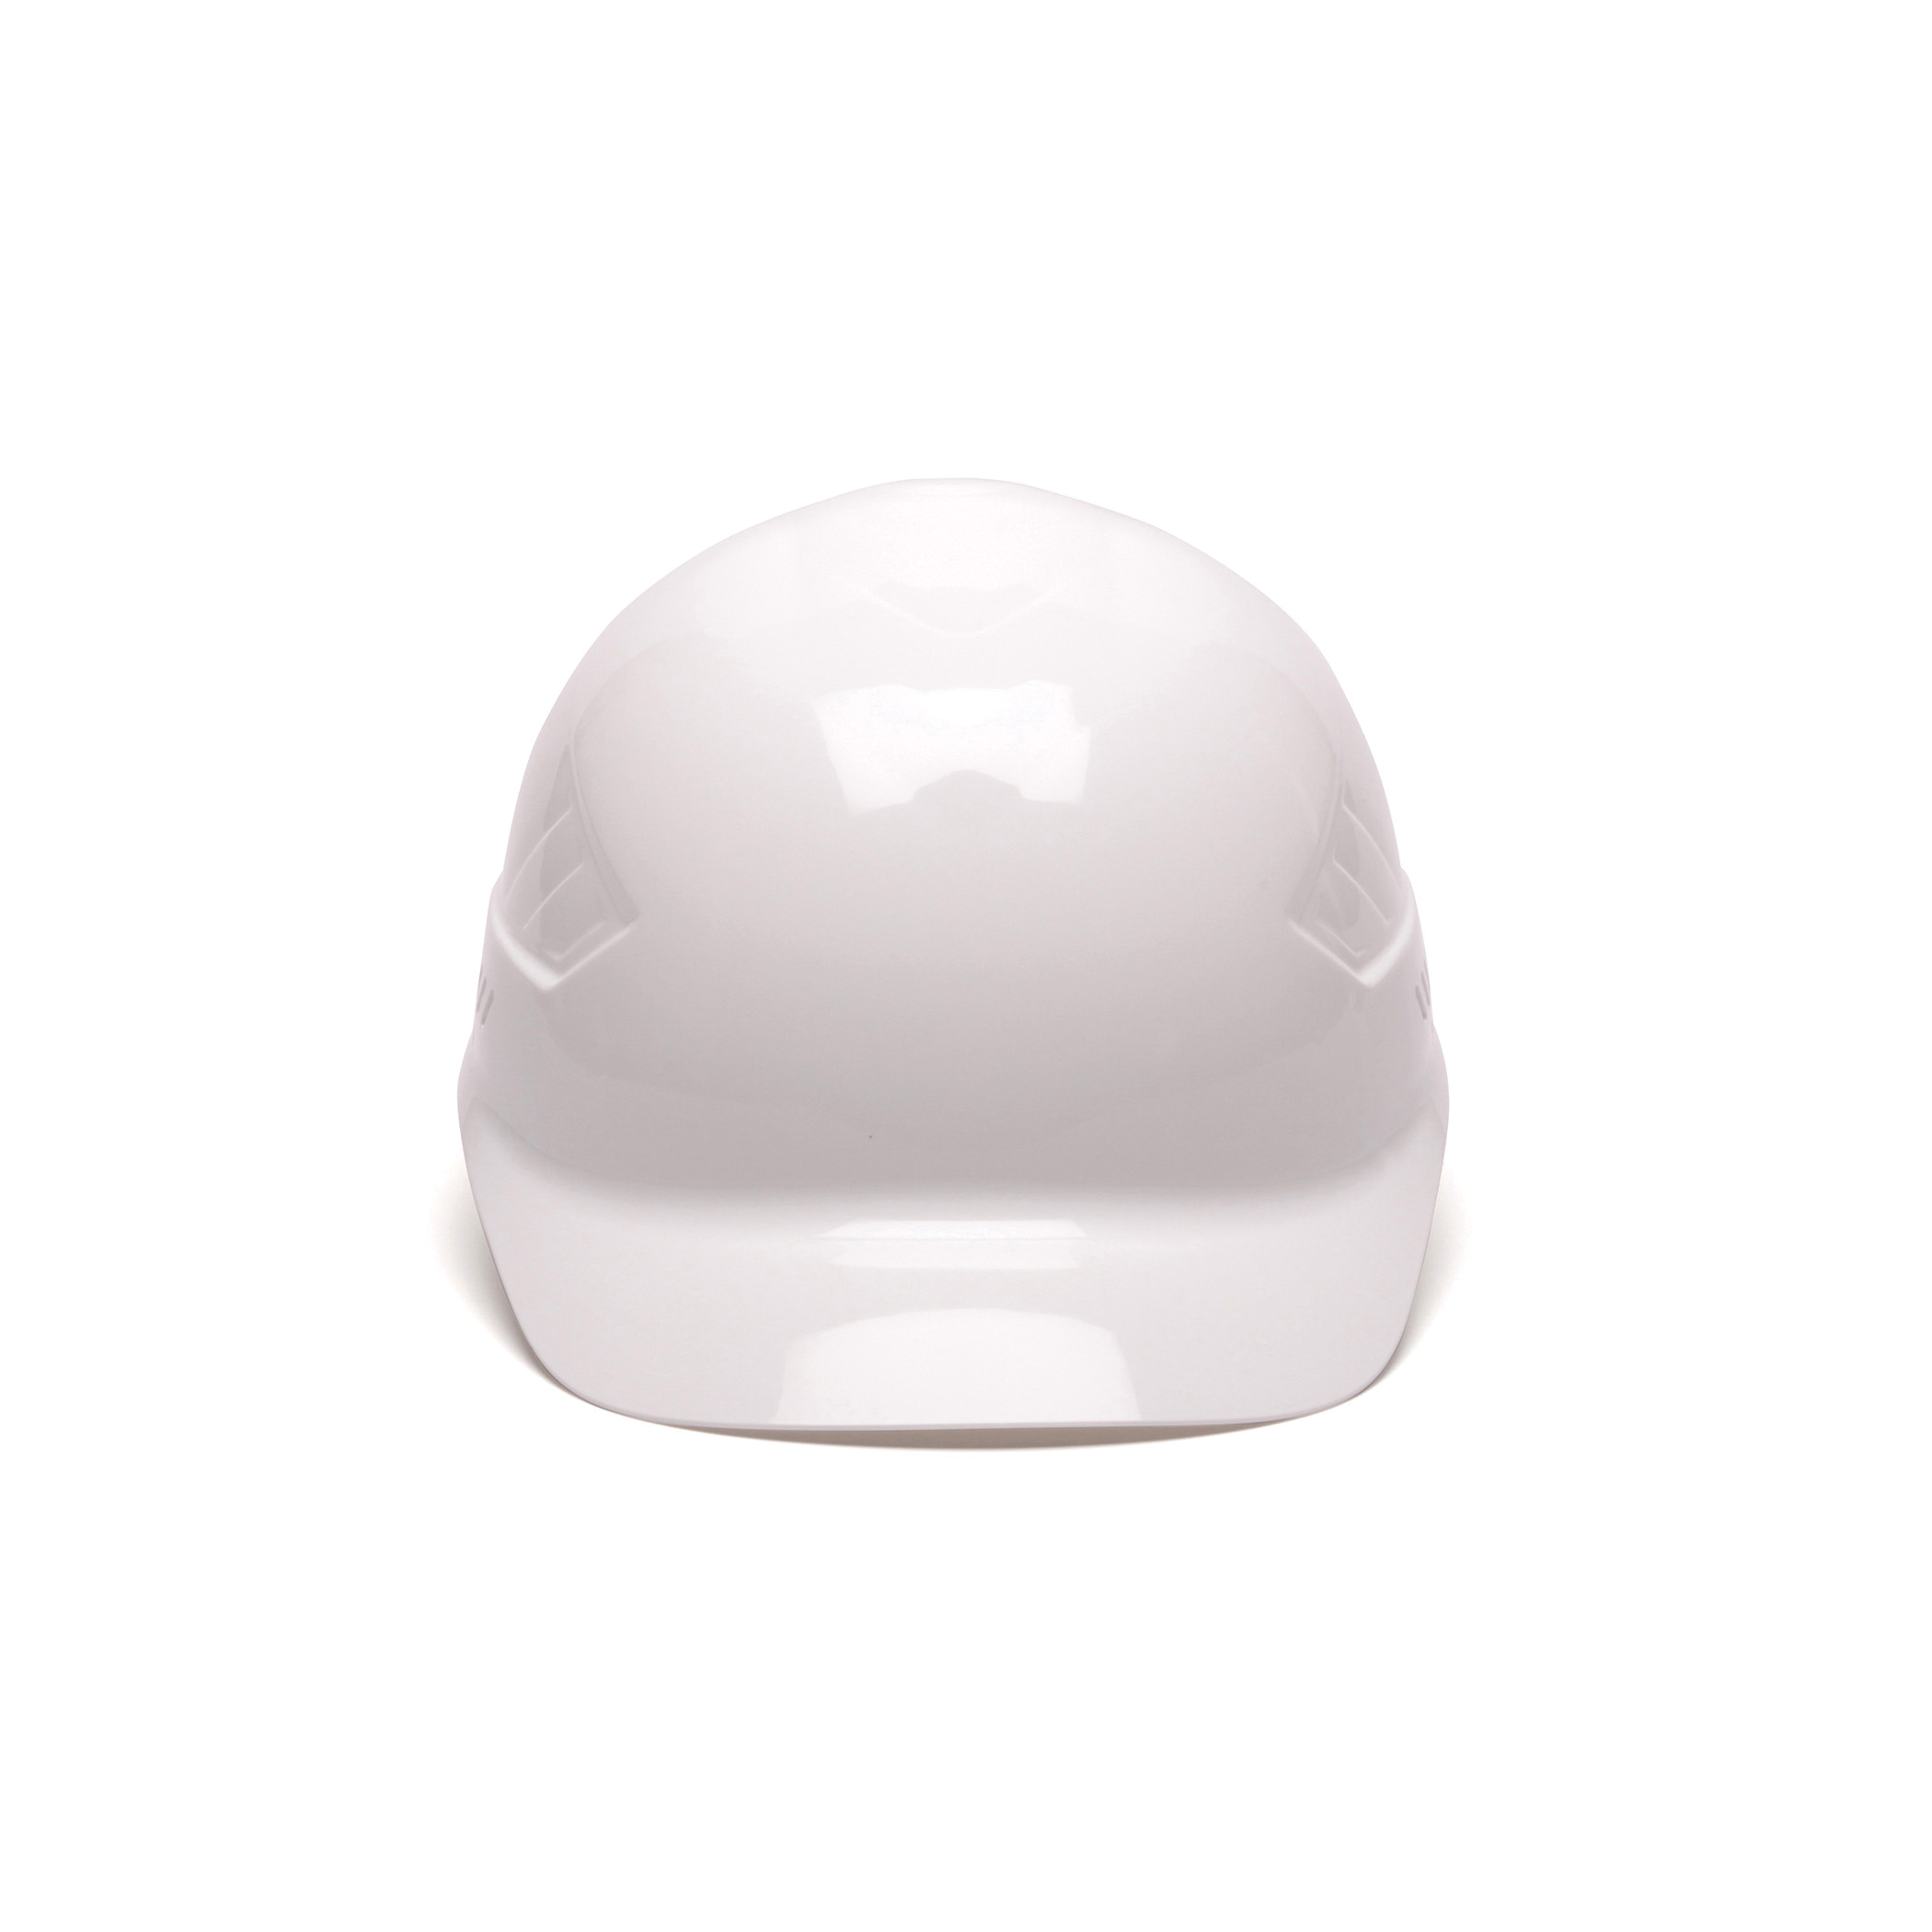 Pyramex® HP14140 SL Series Cap Style Hard Hat, SZ 6-1/2 Fits Mini Hat, SZ 8 Fits Max Hat, HDPE, 4-Point Nylon Suspension, ANSI Electrical Class Rating: Class C, E and G, ANSI Impact Rating: Type I, Ratchet Adjustment